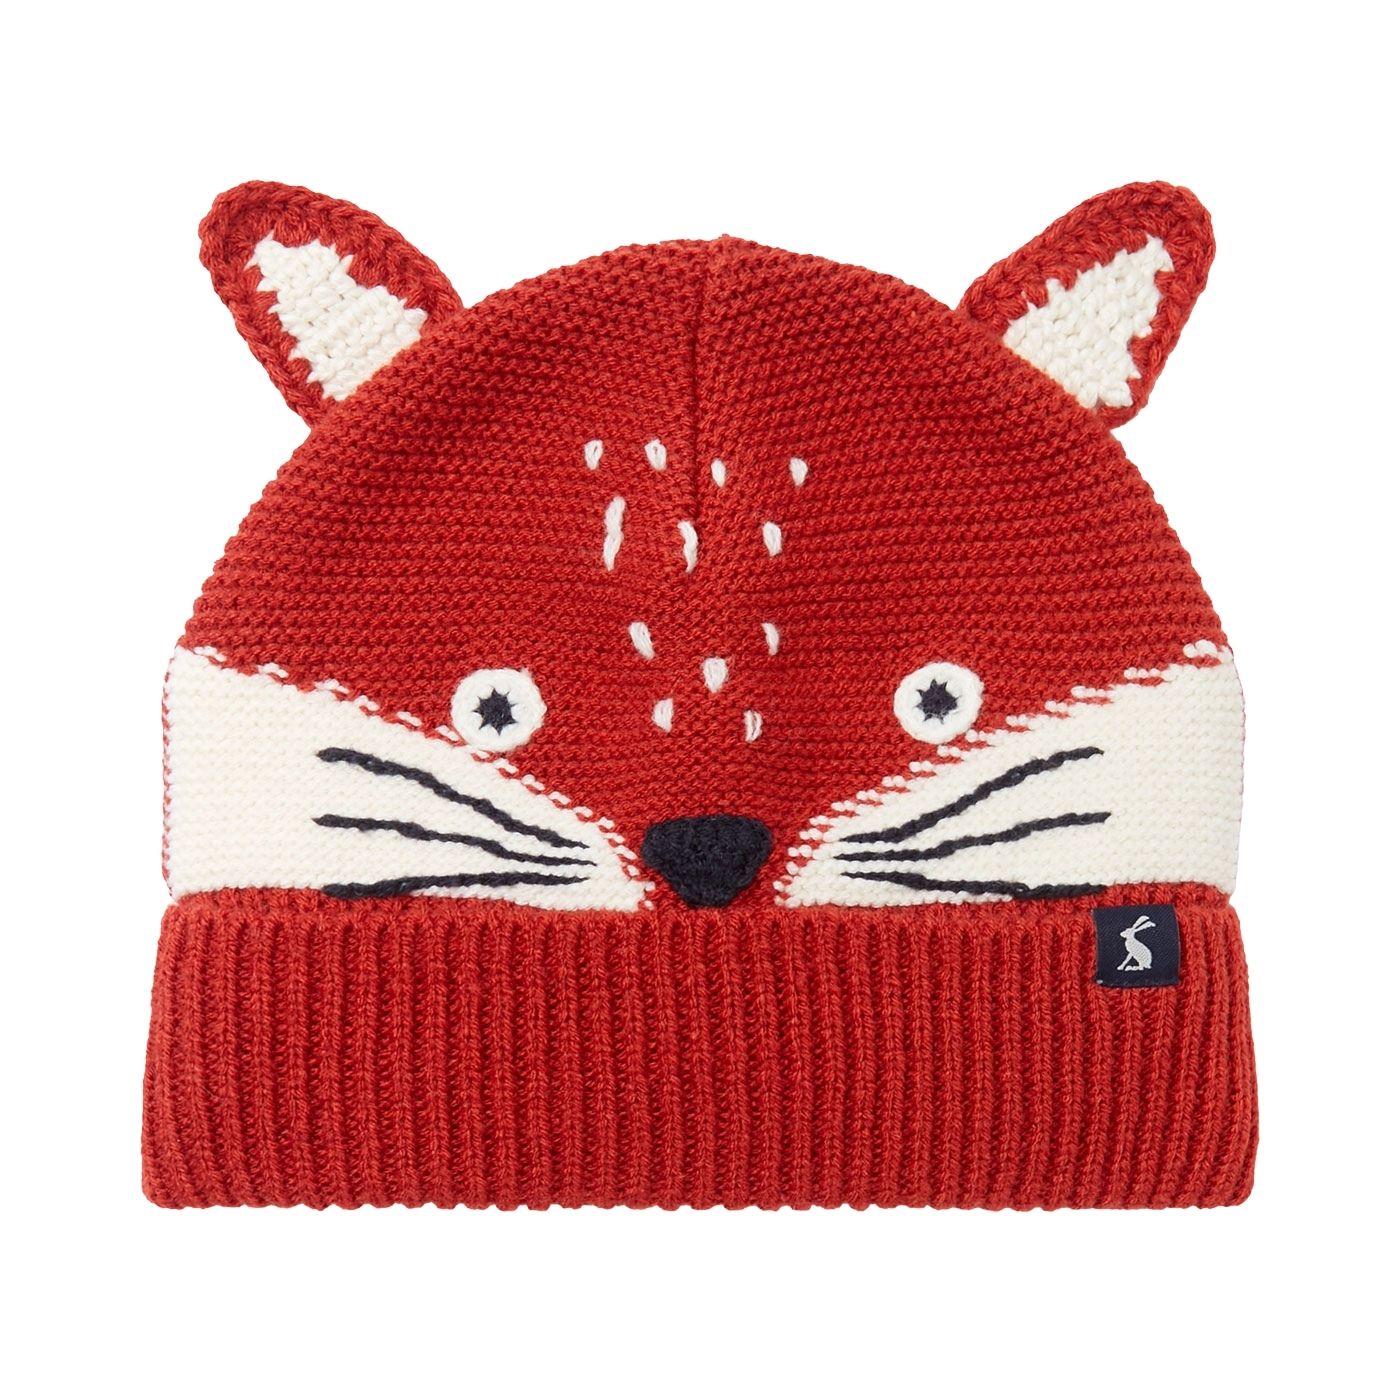 Joules Baby Chummy Character Knitted Hat - Fox Face